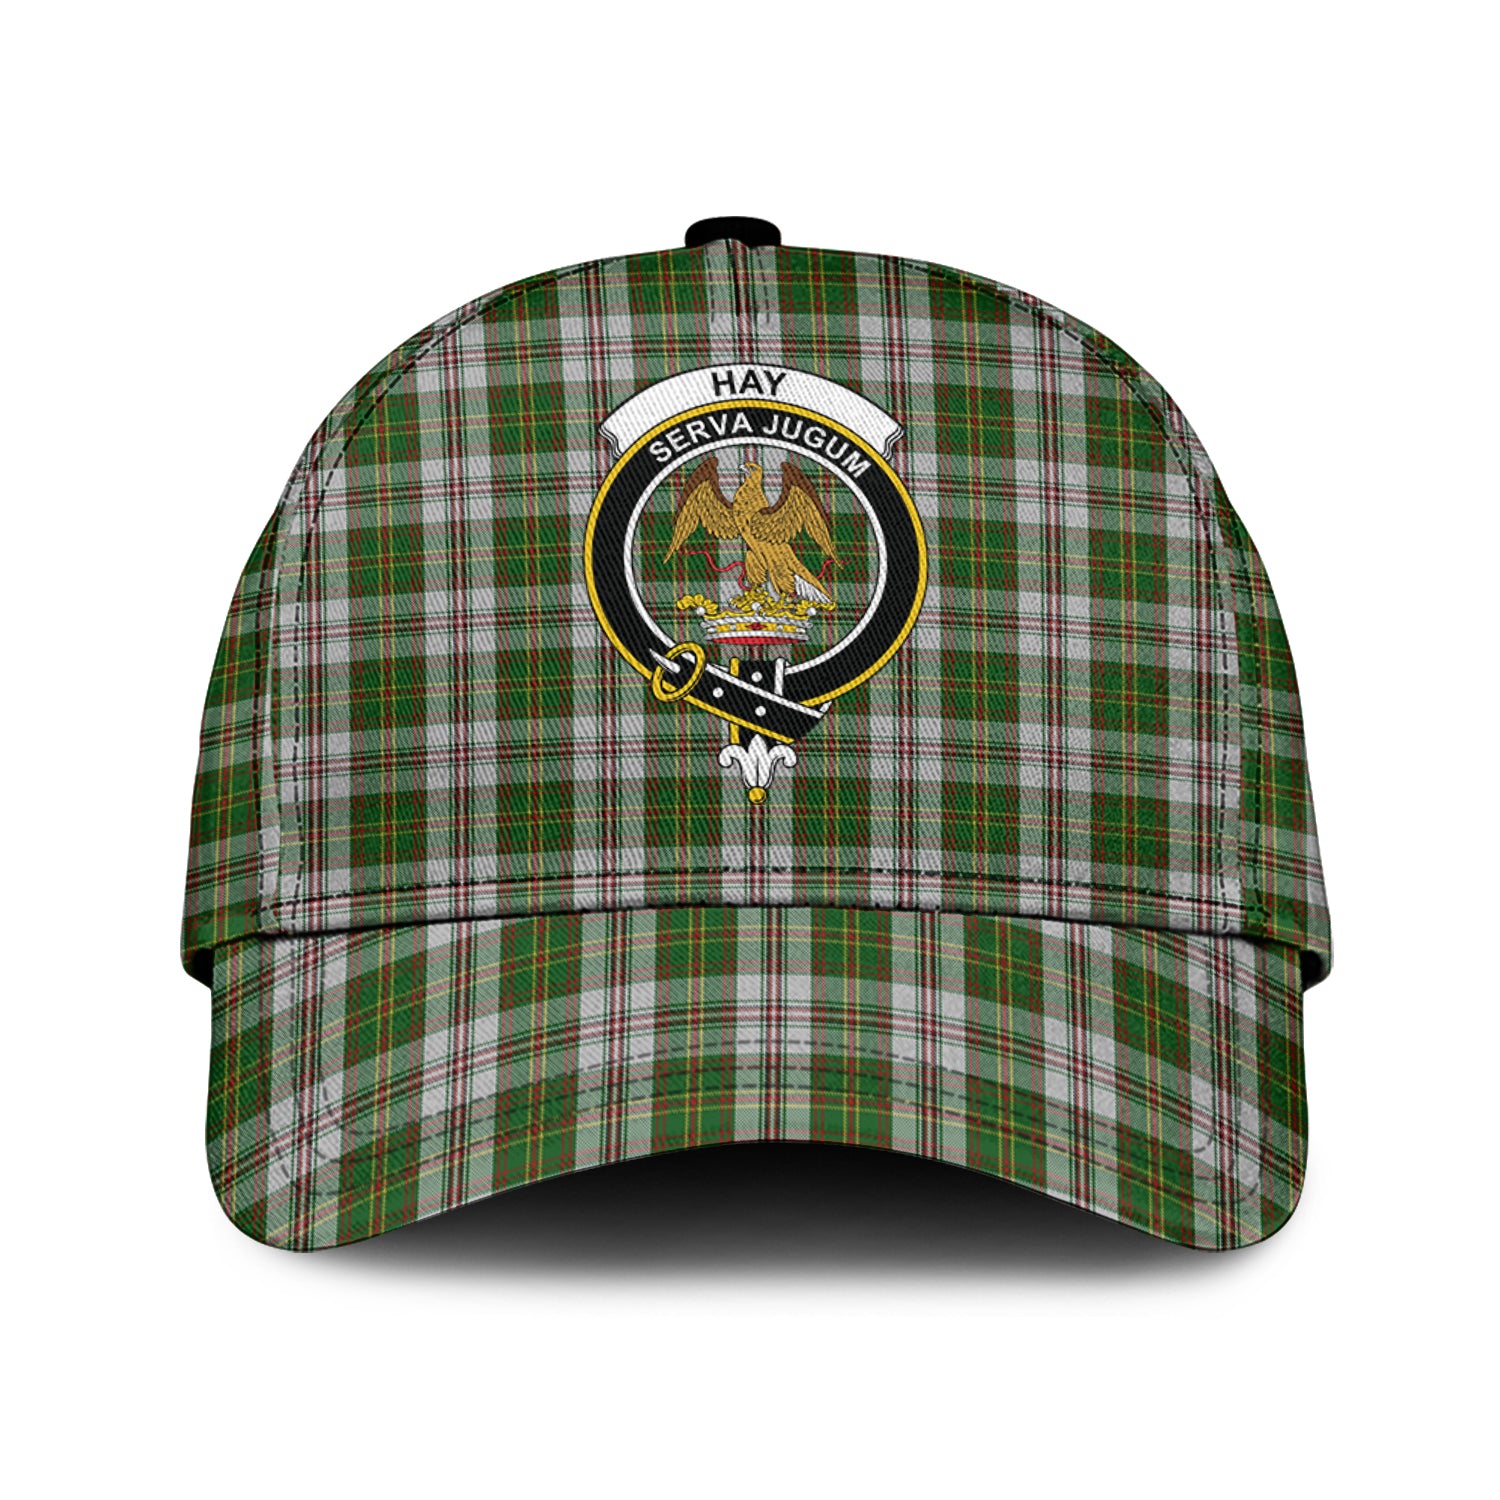 hay-white-dress-tartan-classic-cap-with-family-crest